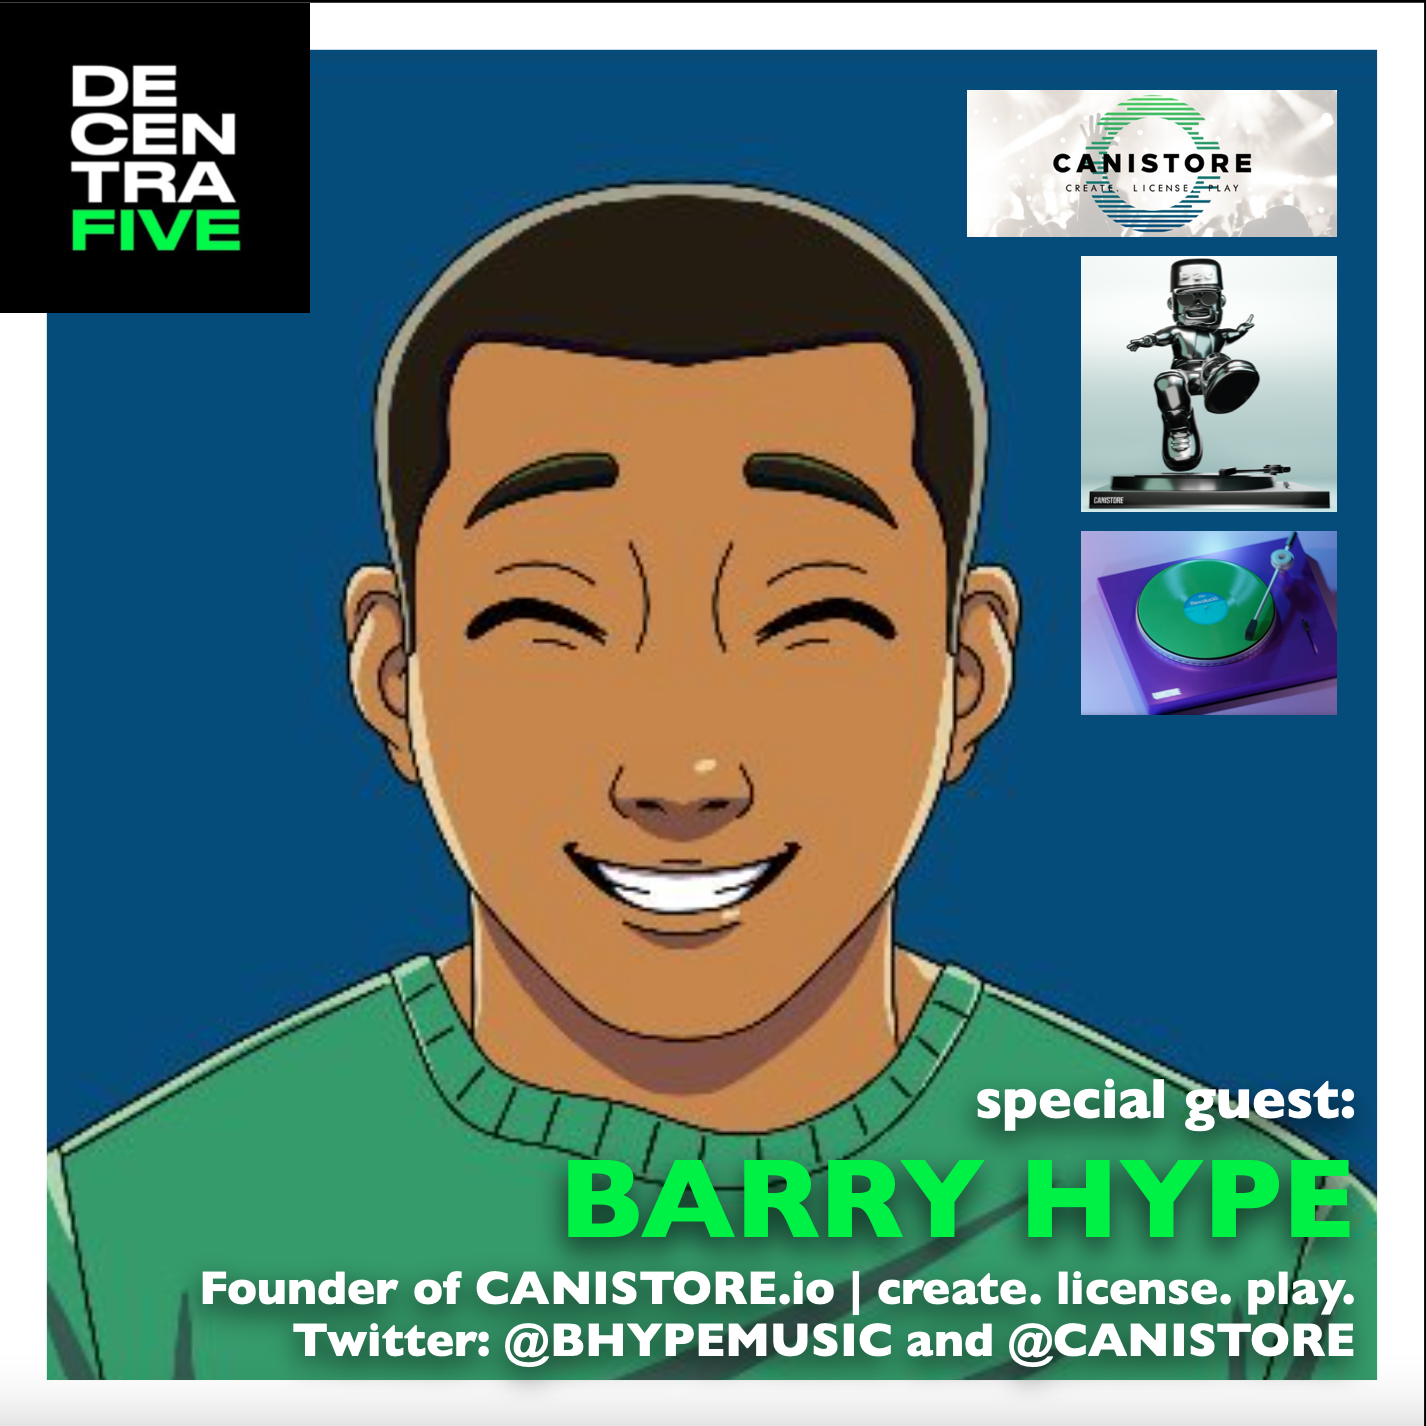 Barry “HYPE” (@BHYPEMUSIC) | Founder of @Canistore (Canistore.io) | acclaimed musical artist and producer | father, creative, & entrepreneur | lives & works in the UK | on DECENTRAFIVE Image